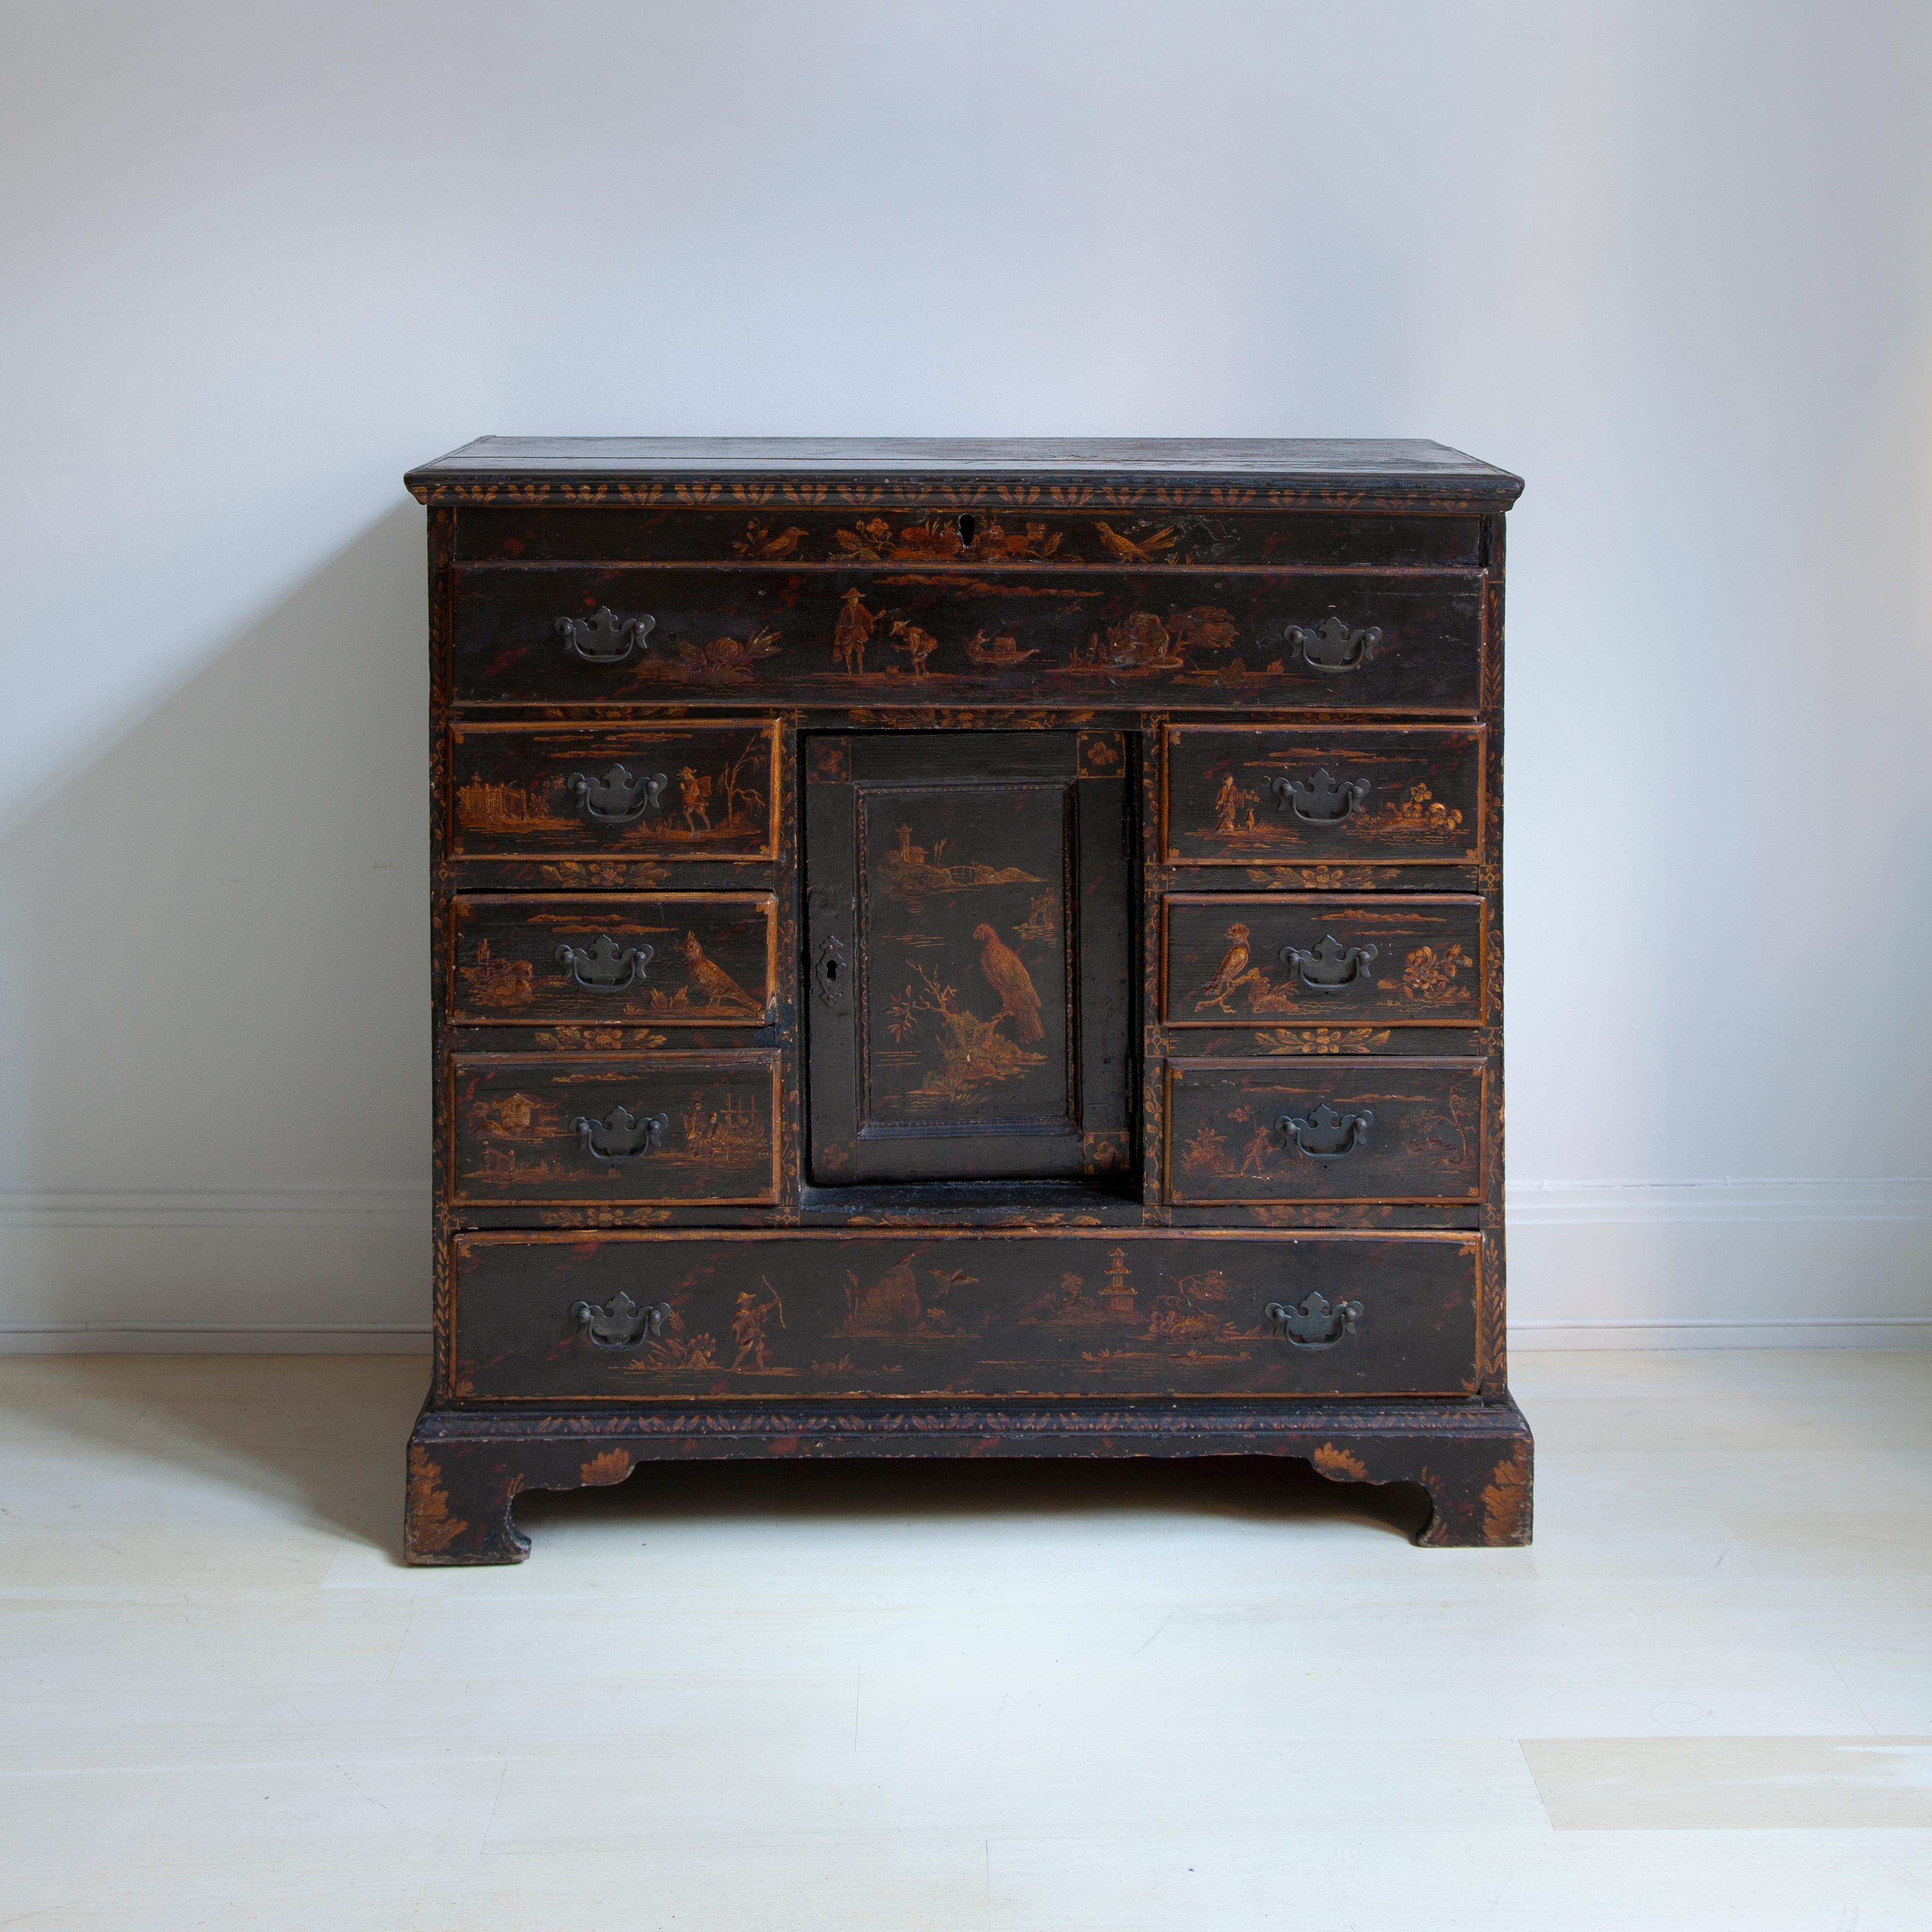 Lacquered 18th Century English Wood Chest with Chinoiserie and Floral Motifs